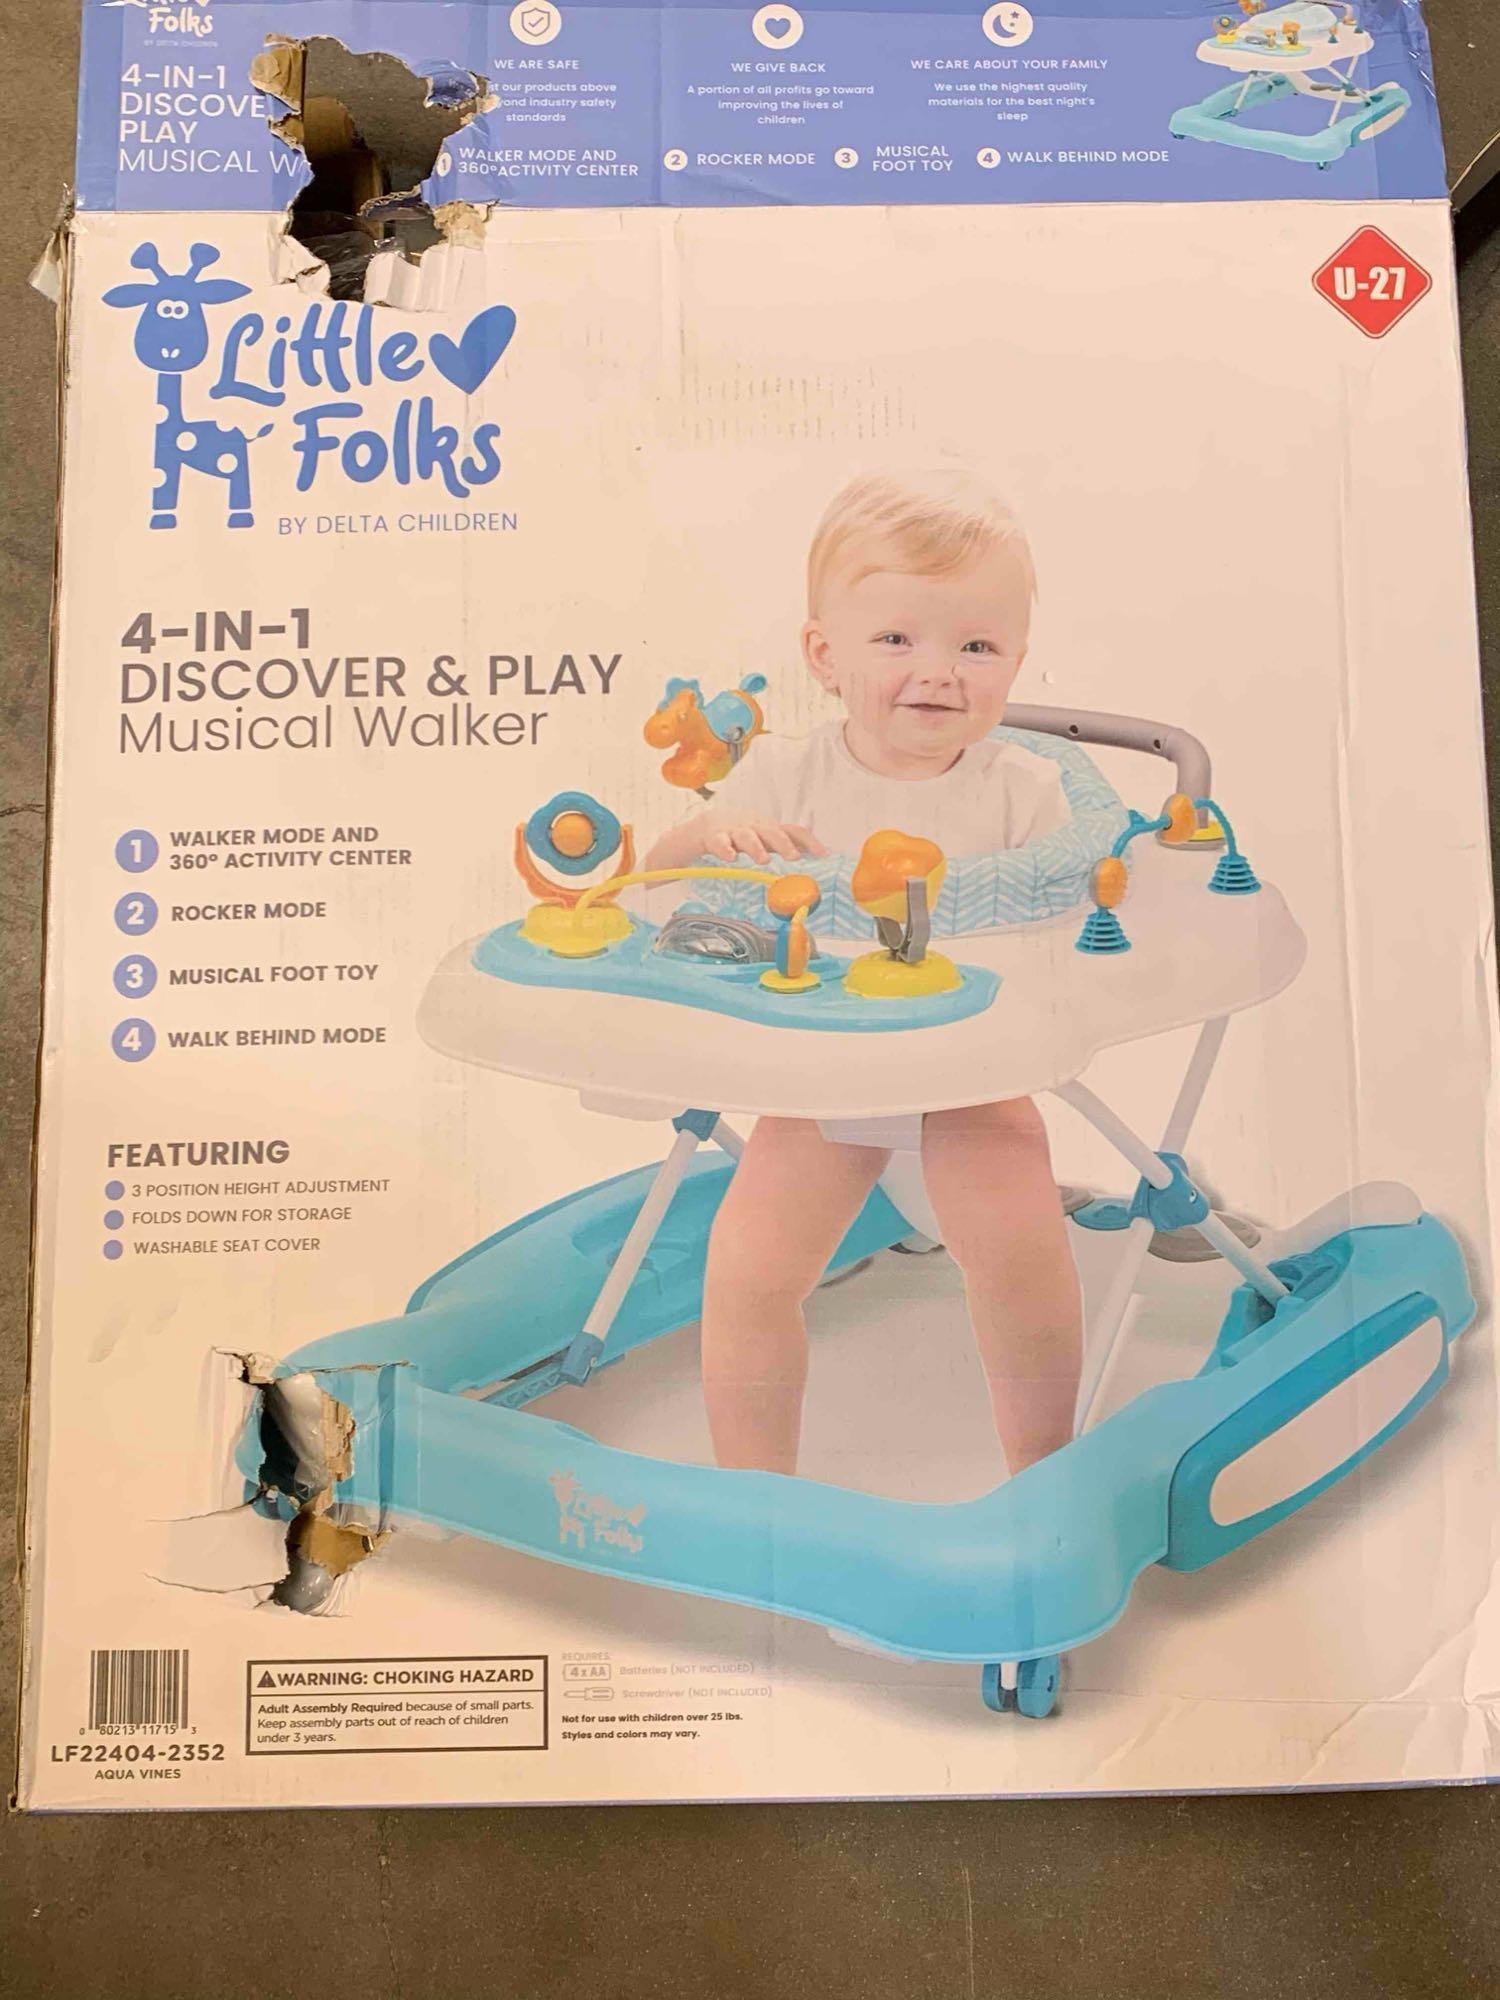 Little Folks by Delta Children 4-in-1 Discover & Play Musical Walker